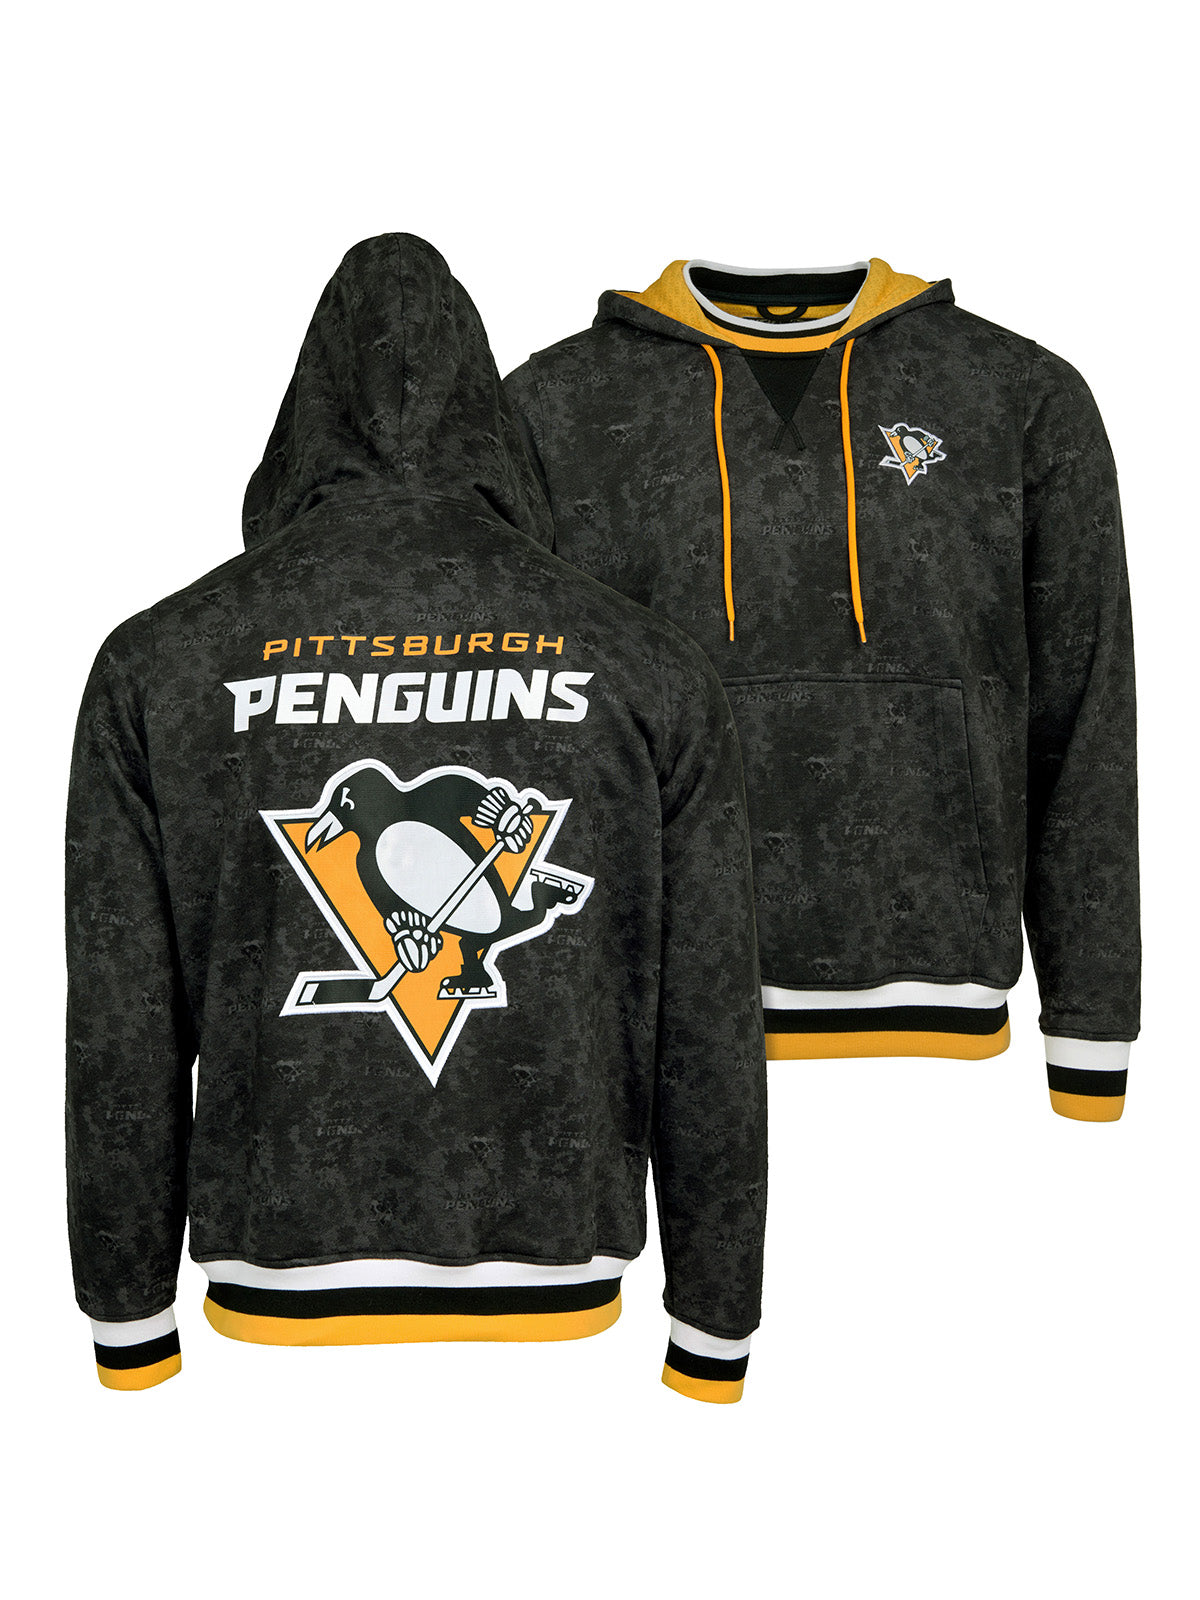 Pittsburgh Penguins Hoodie - Show your team spirit, with the iconic team logo patch on the front and back, and proudly display your Pittsburgh Penguins support in their team colors with this NHL hockey hoodie.